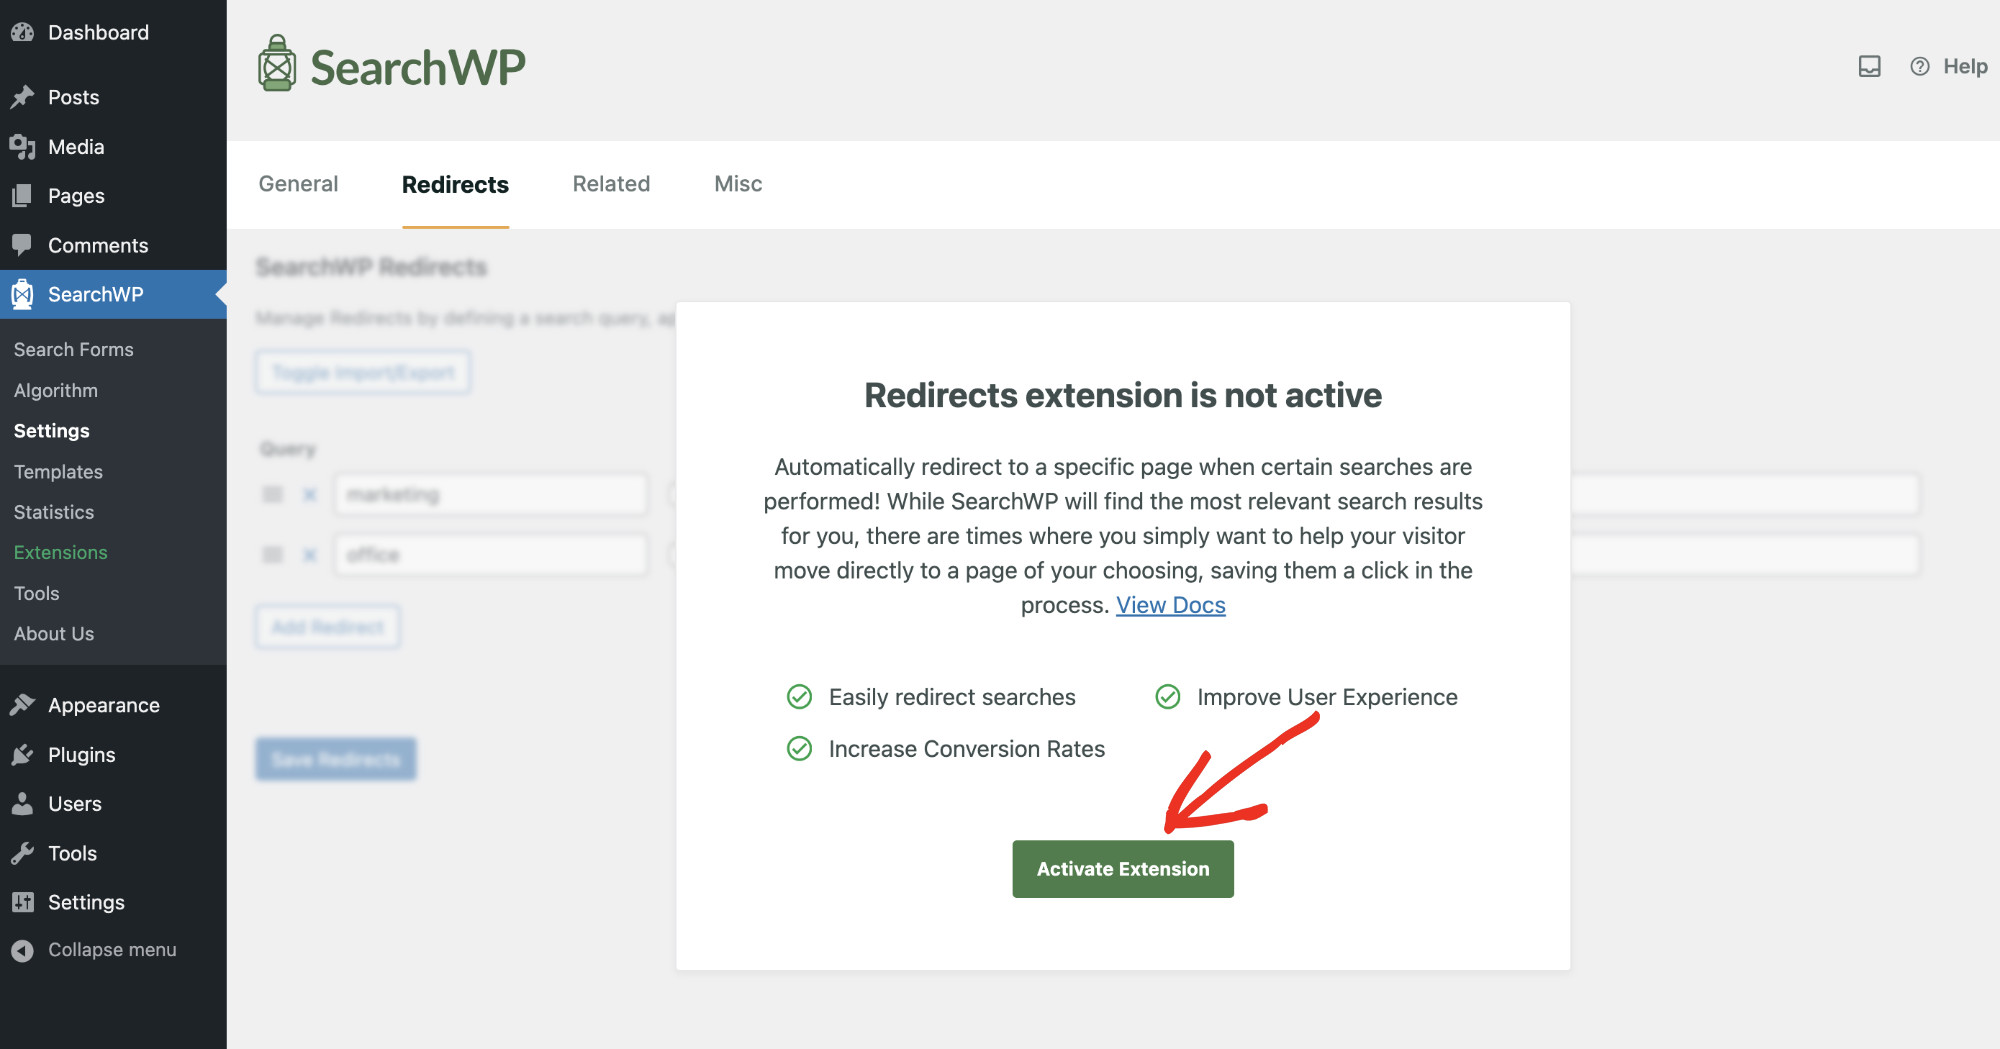 How to redirect search results in WordPress: Configuring Redirect with SearchWP Step 2